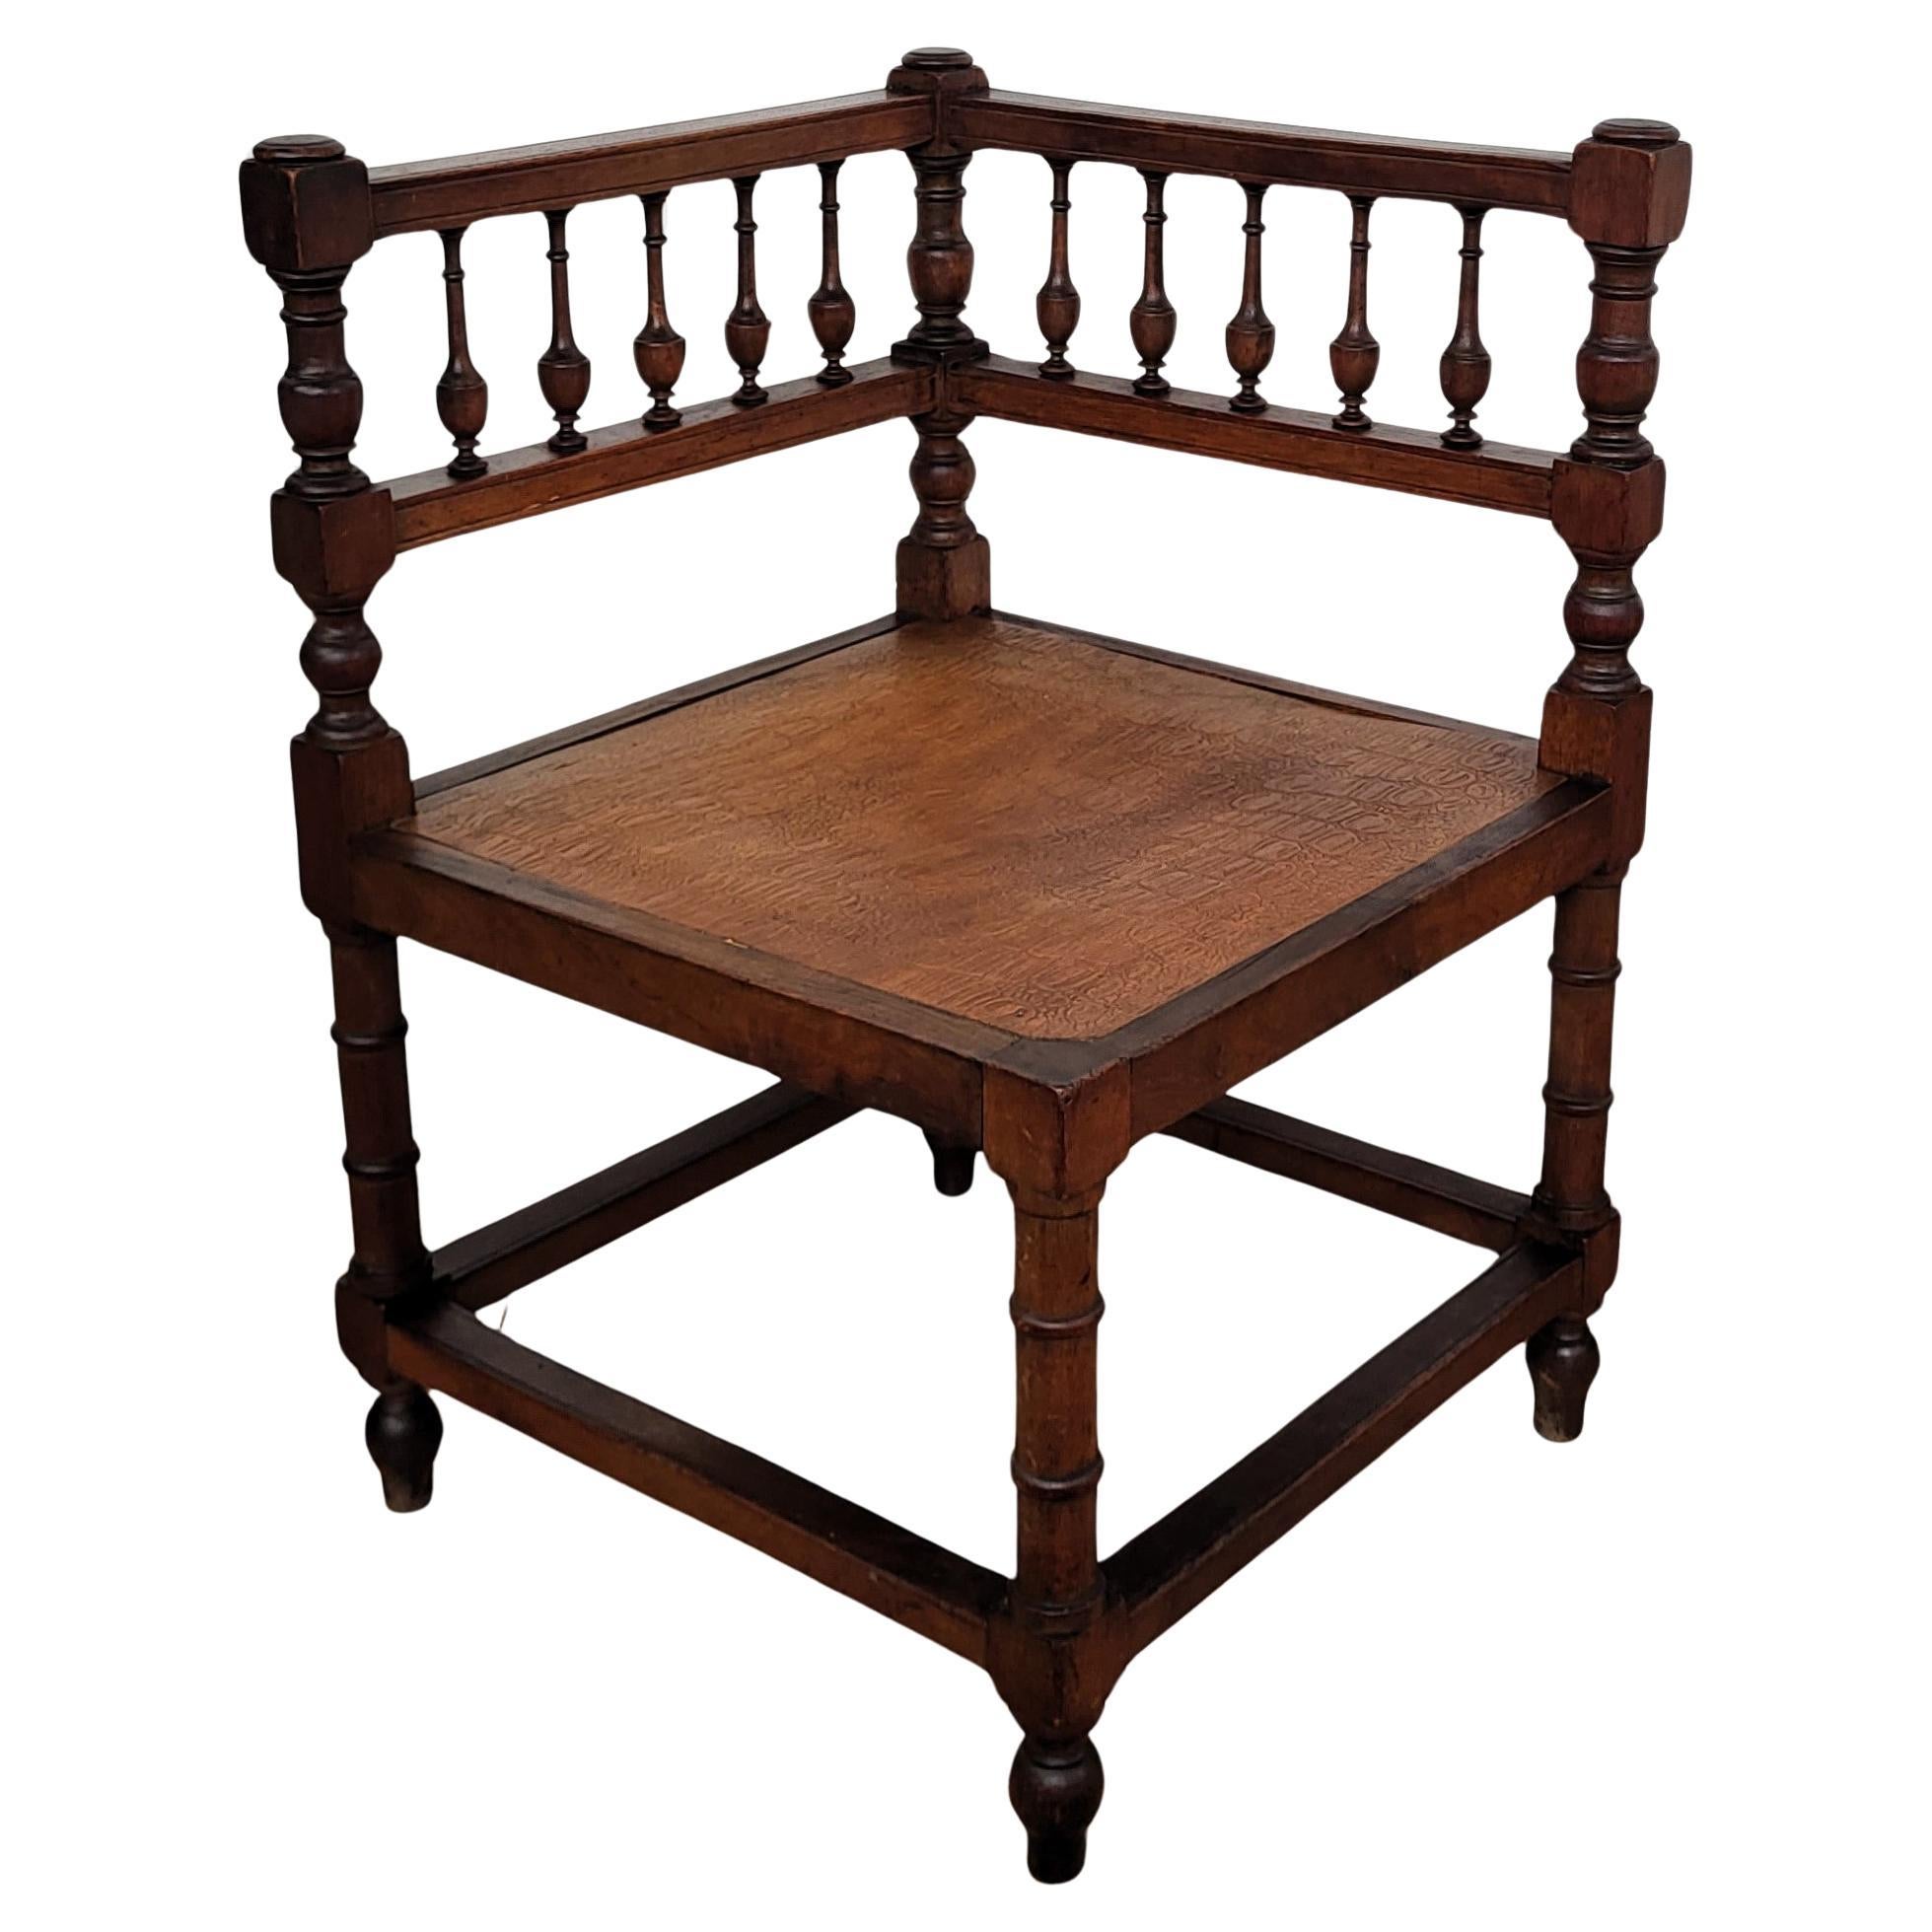 1950s Italian Neoclassic Carved Wooden Corner Chair For Sale